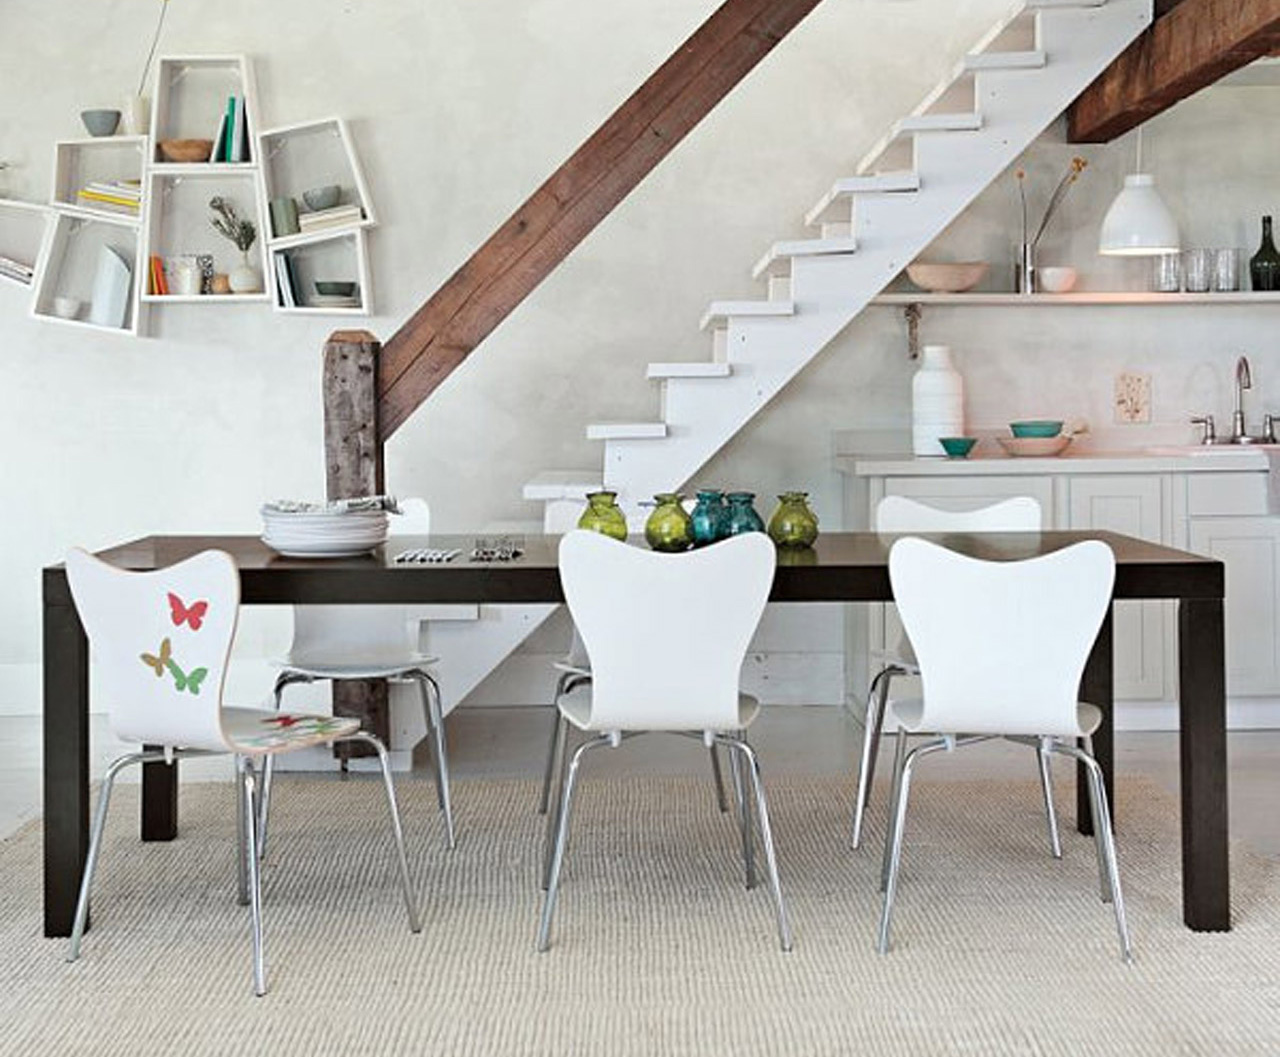 Simple Parsons Dining Interesting Simple Parsons Expandable Wooden Dining Table Design Ideas With Modern Molded Plastic Designer Chairs In White Color Also Good Tigress Soft Style Carpet Colors Dining Room Choosing The Right Dining Room Tables